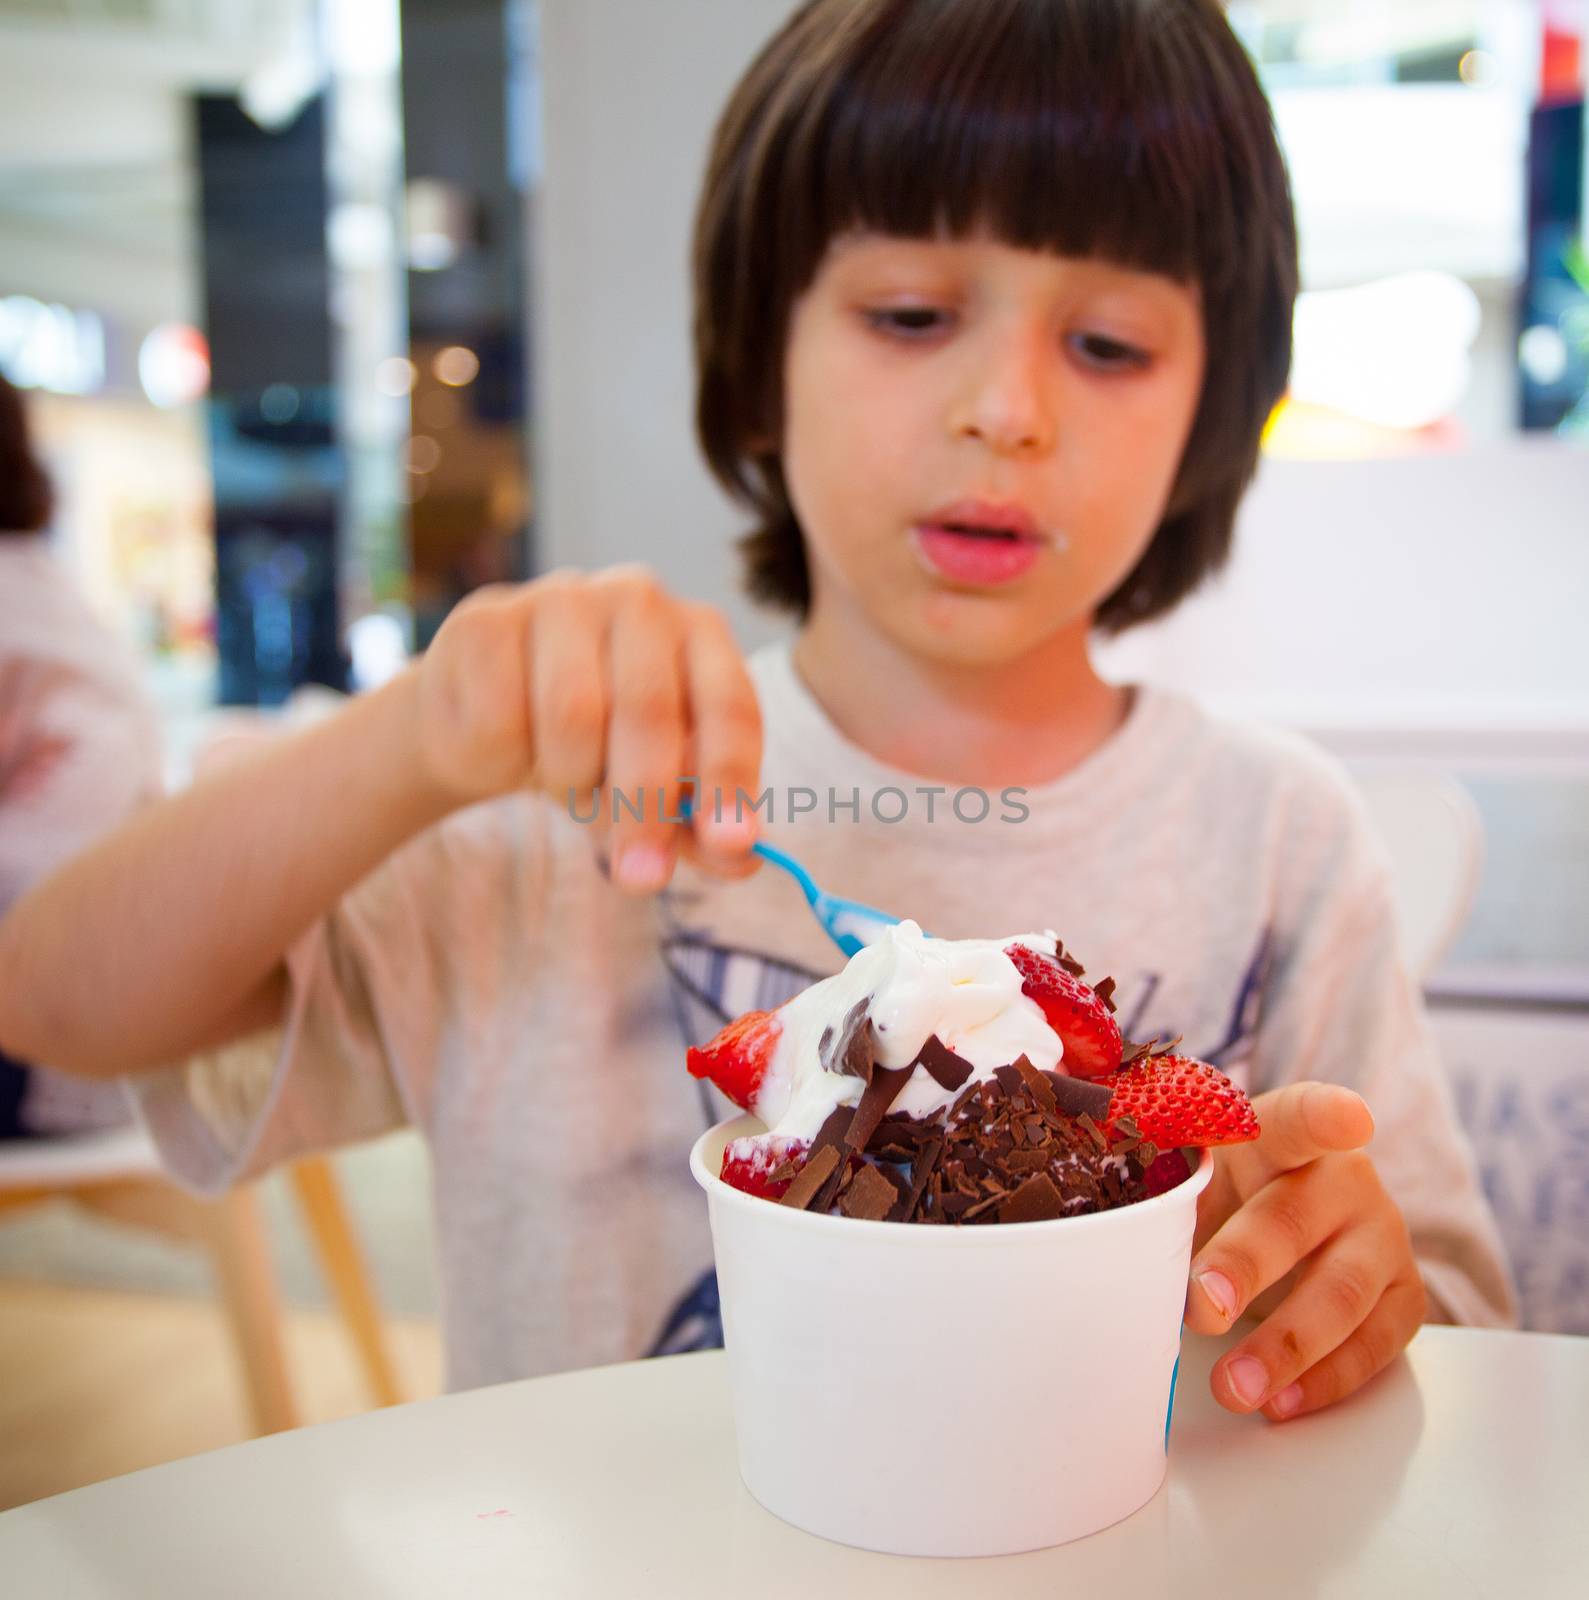 boy eating ice cream with chocolate and strawberries, editorial use only